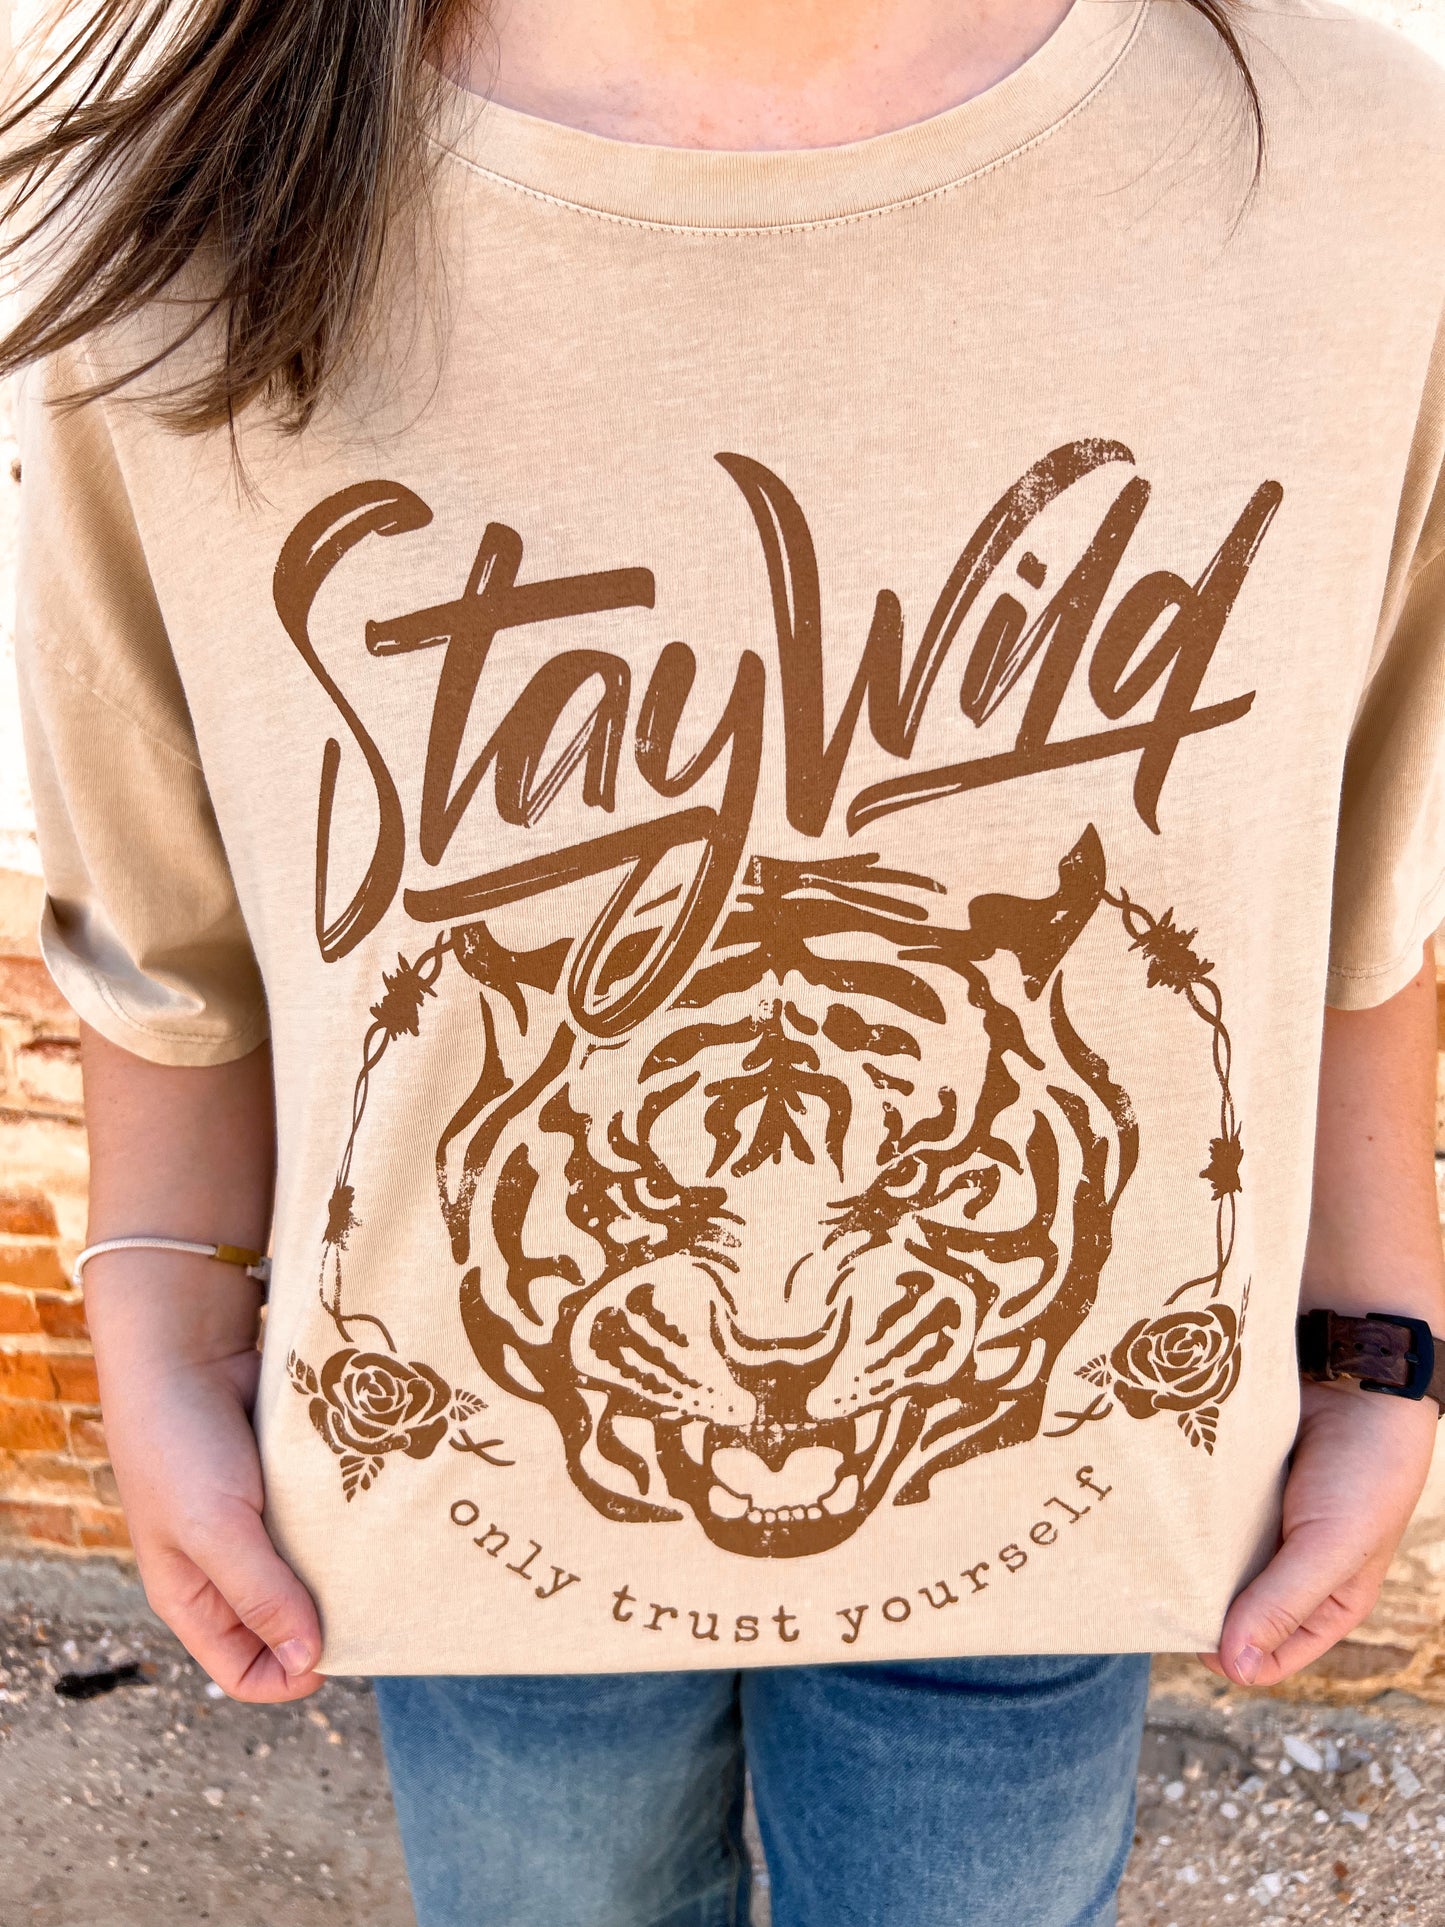 Premium Wash Oversized Stay Wild Tiger Graphic Top-Top-tres bien-11/28/23 md, 1st md, Max Retail-The Twisted Chandelier